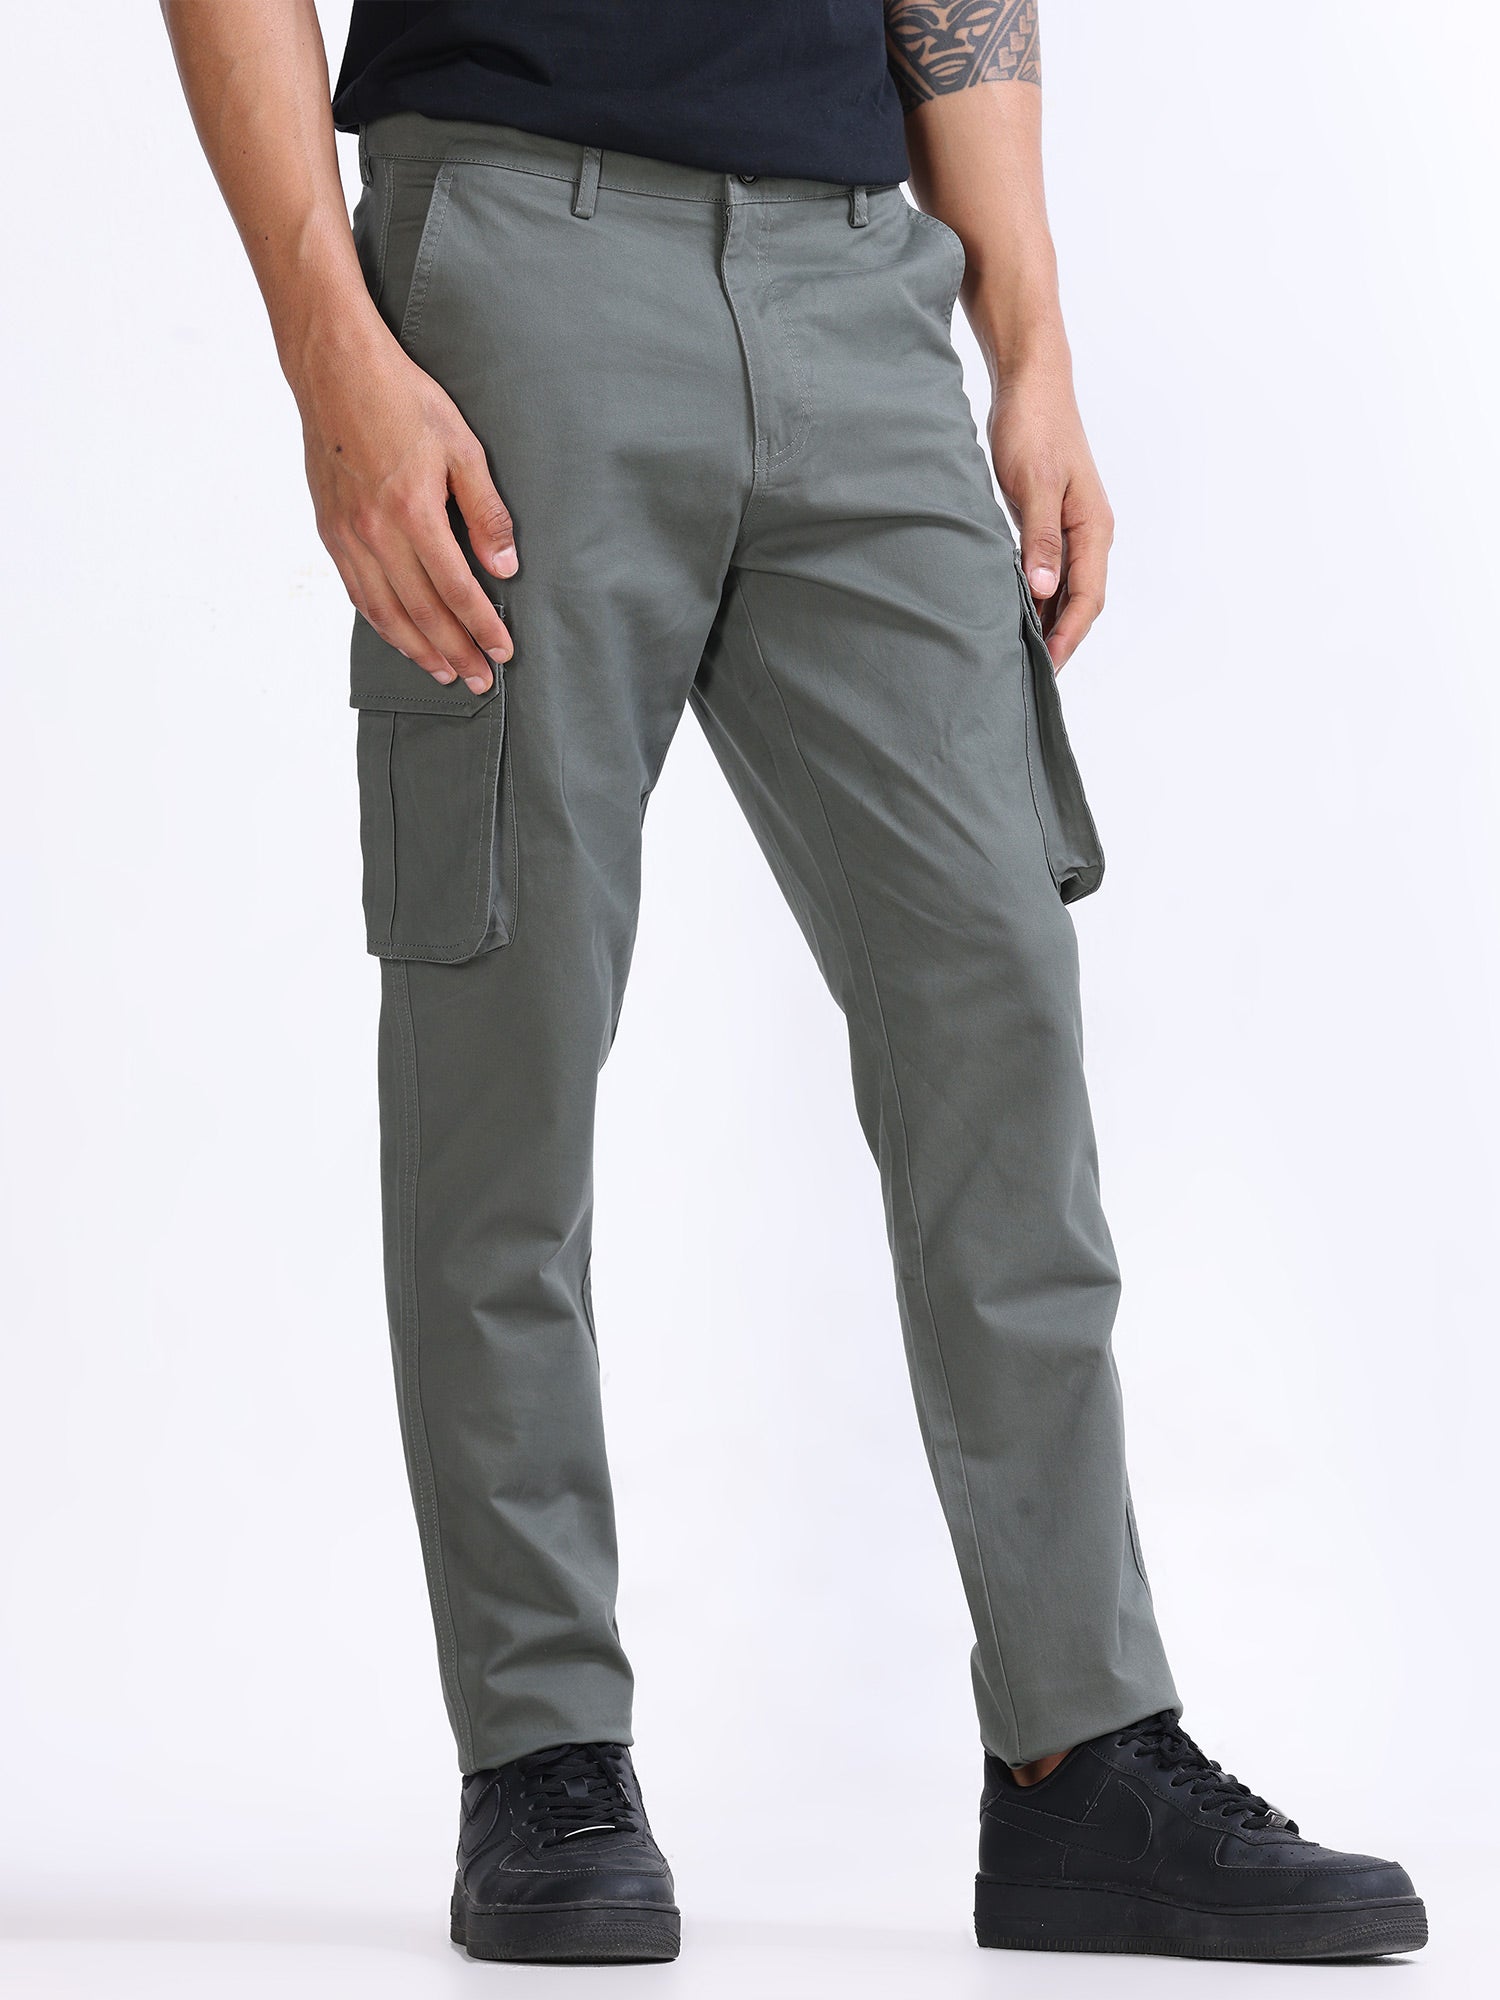 Buy Green Trousers & Pants for Men by SNITCH Online | Ajio.com